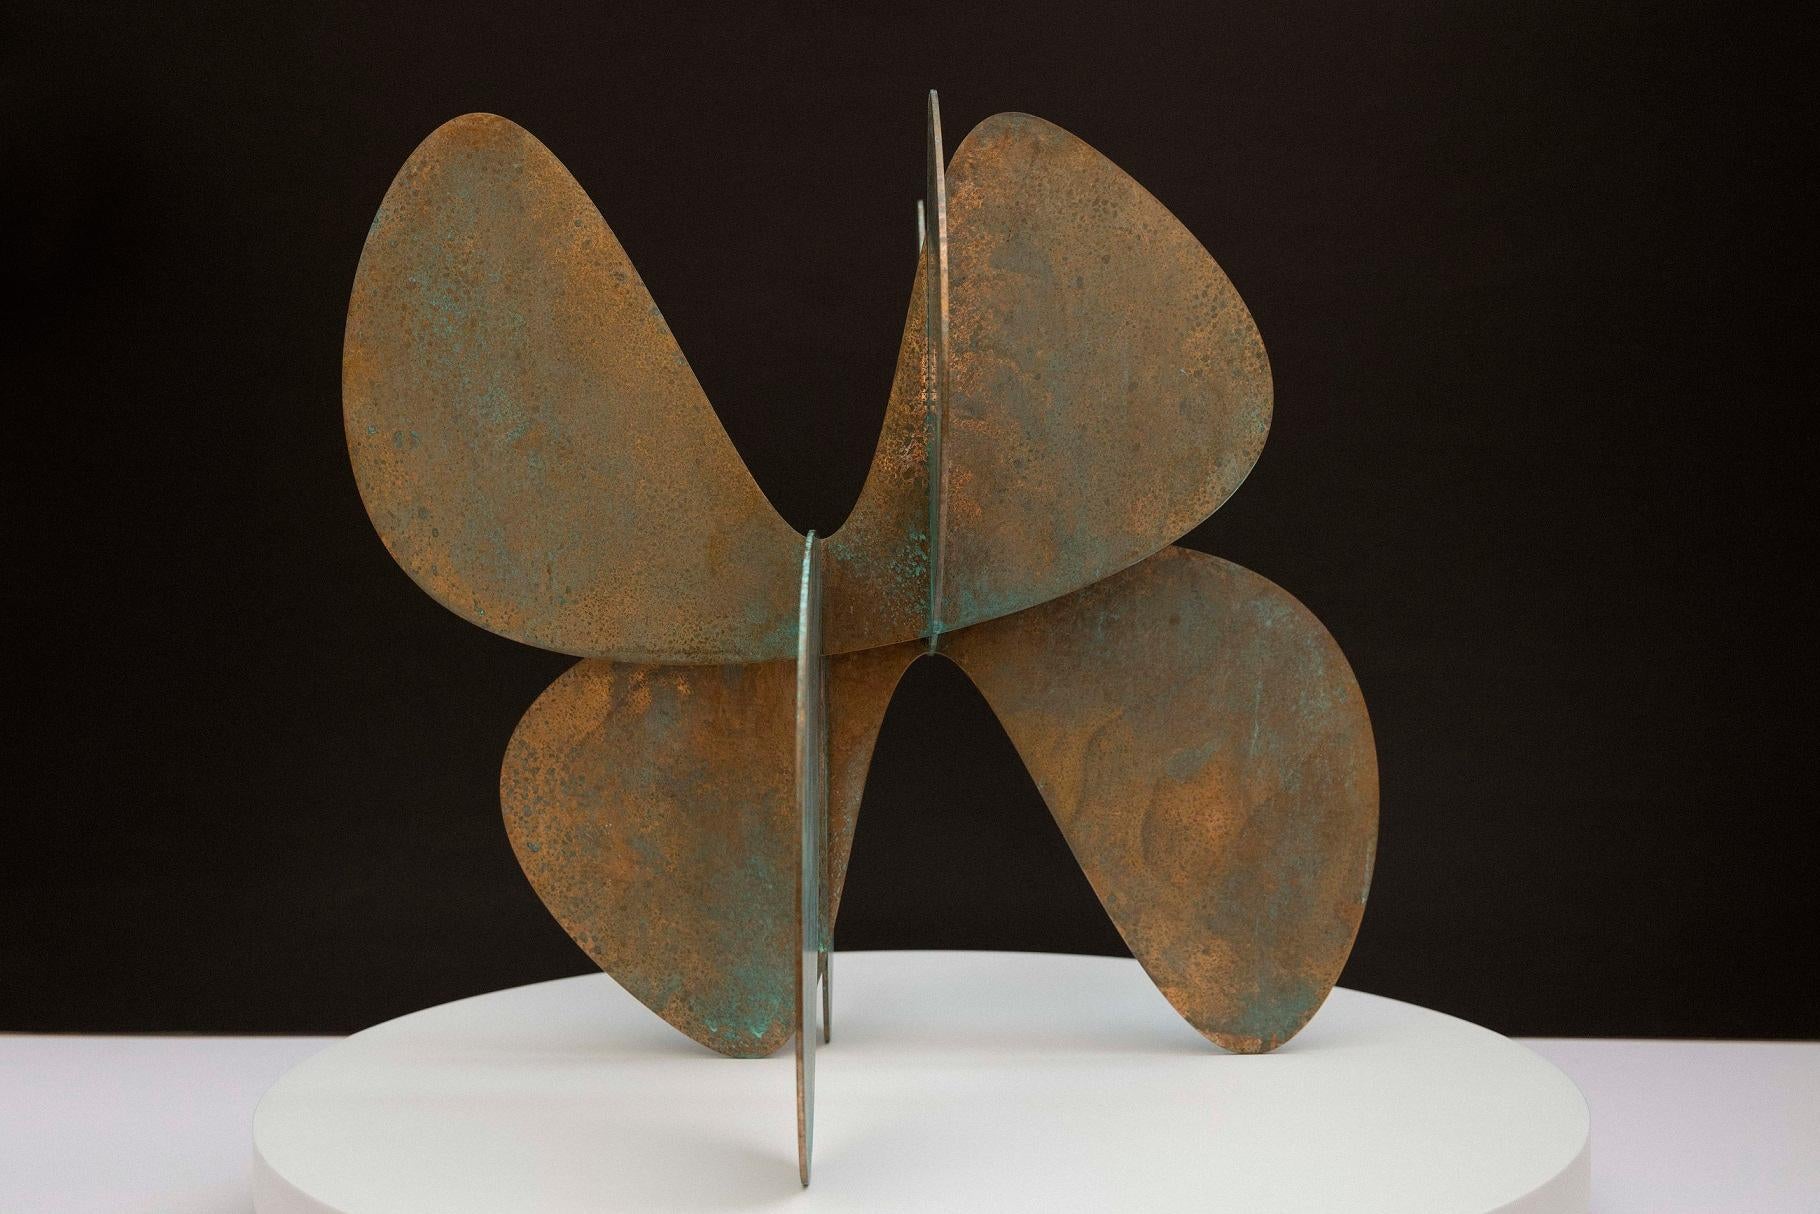 Barricada #11 b S by A. Vega Beuvrin - abstract bronze sculpture - Abstract Sculpture by Alejandro Vega Beuvrin